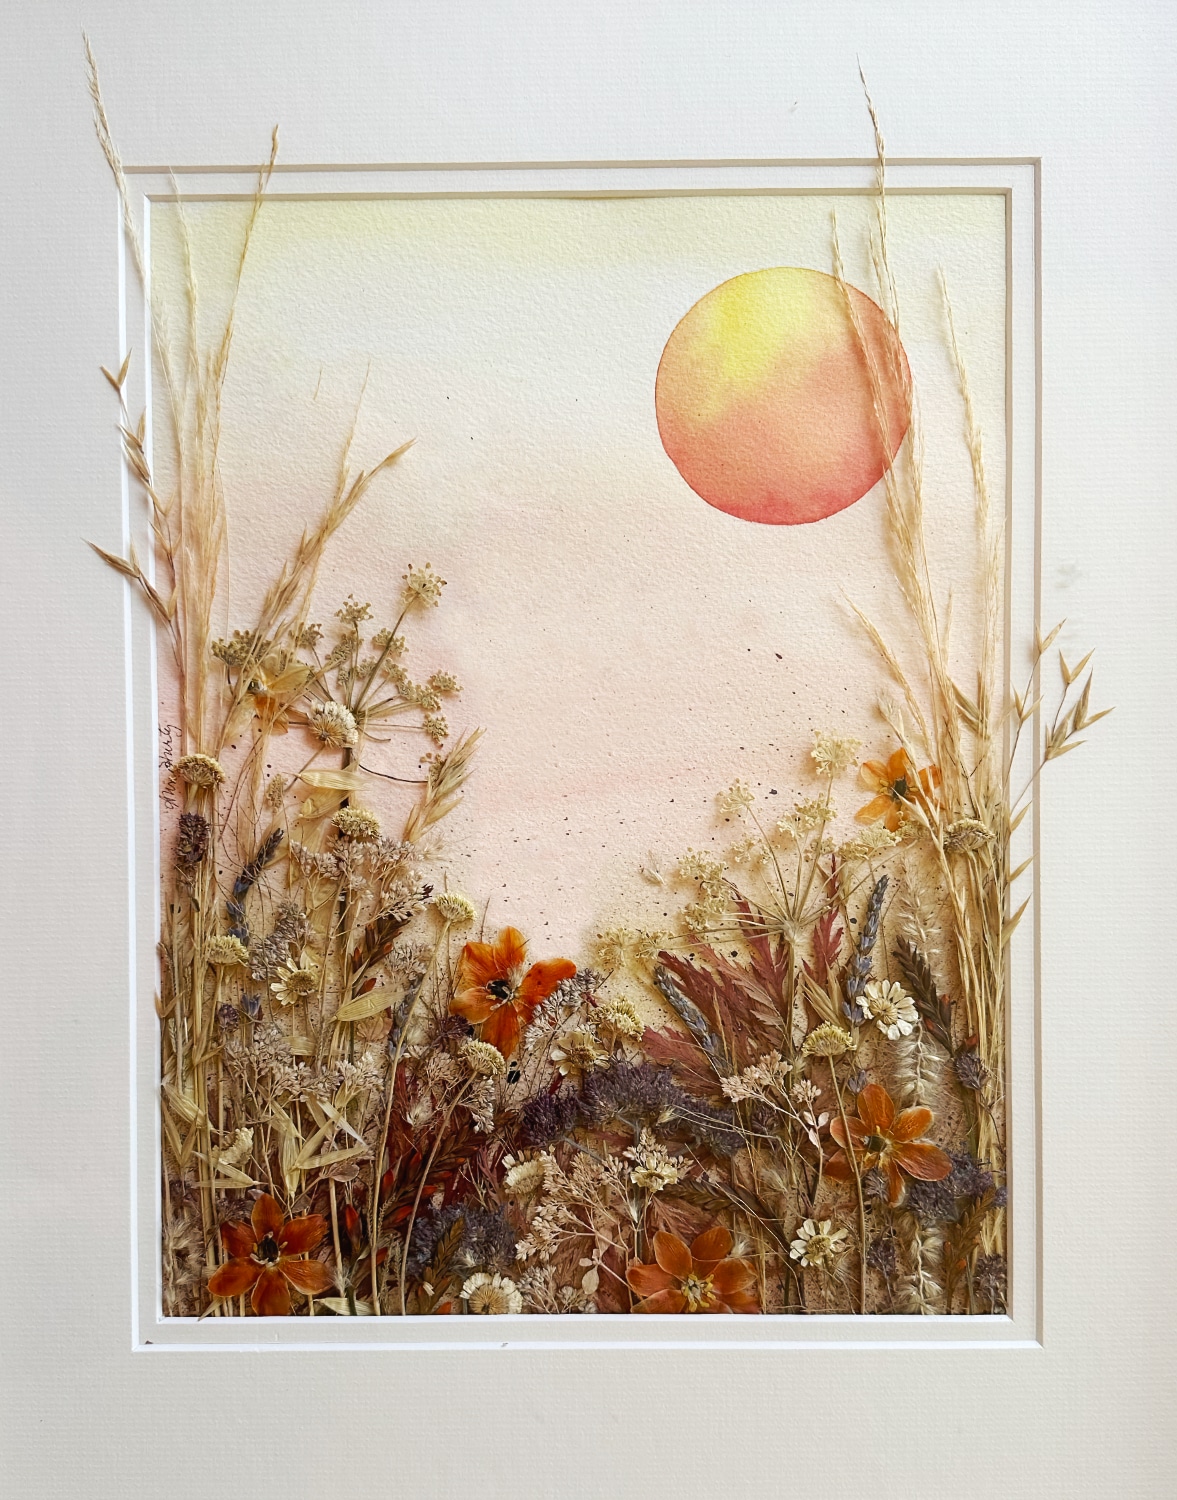 watercolor on paper and assembled dried plants